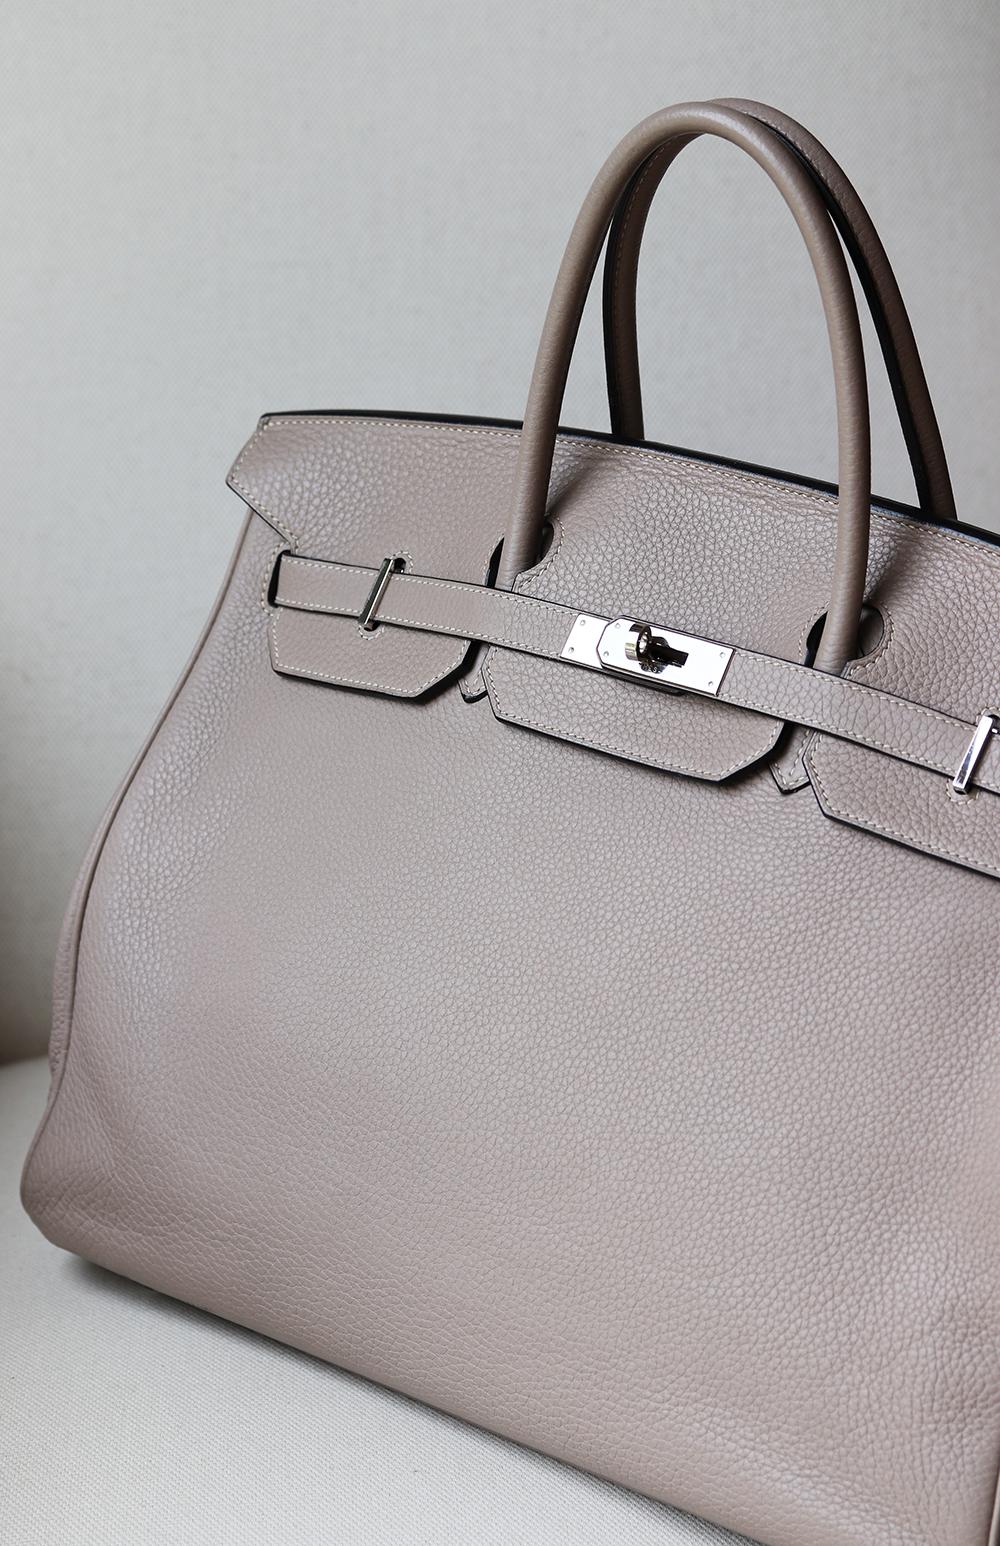 Hermès 40cm Clemence Birkin Bag with Palladium hardware.
Top handle straps.
Tonal leather lining.
Double slit pocket and zip pocket on interior walls.
Turn-lock closure at front. 
Colour: Gris (light stone-grey)
Does not come with dustbag, lock,